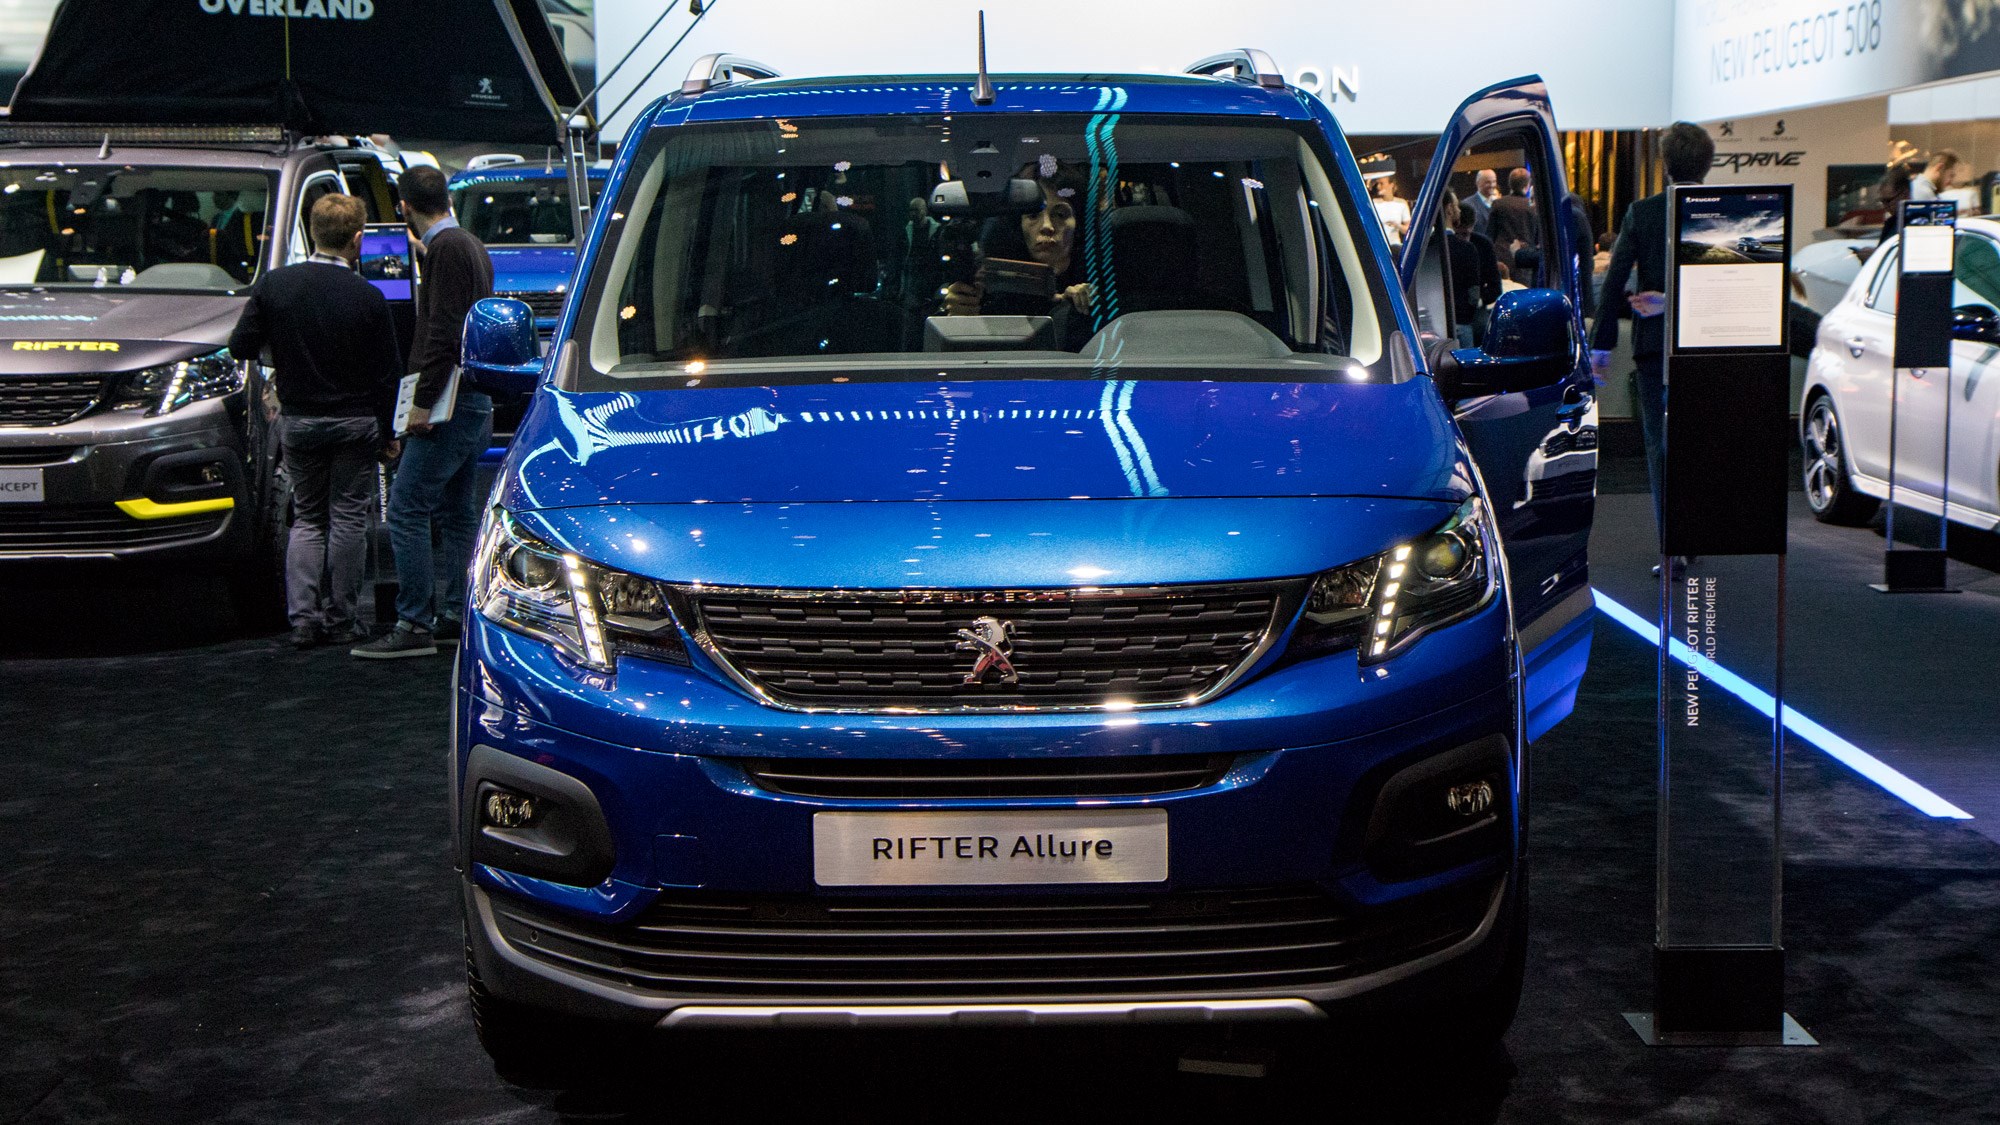 Specs for all Peugeot Rifter versions